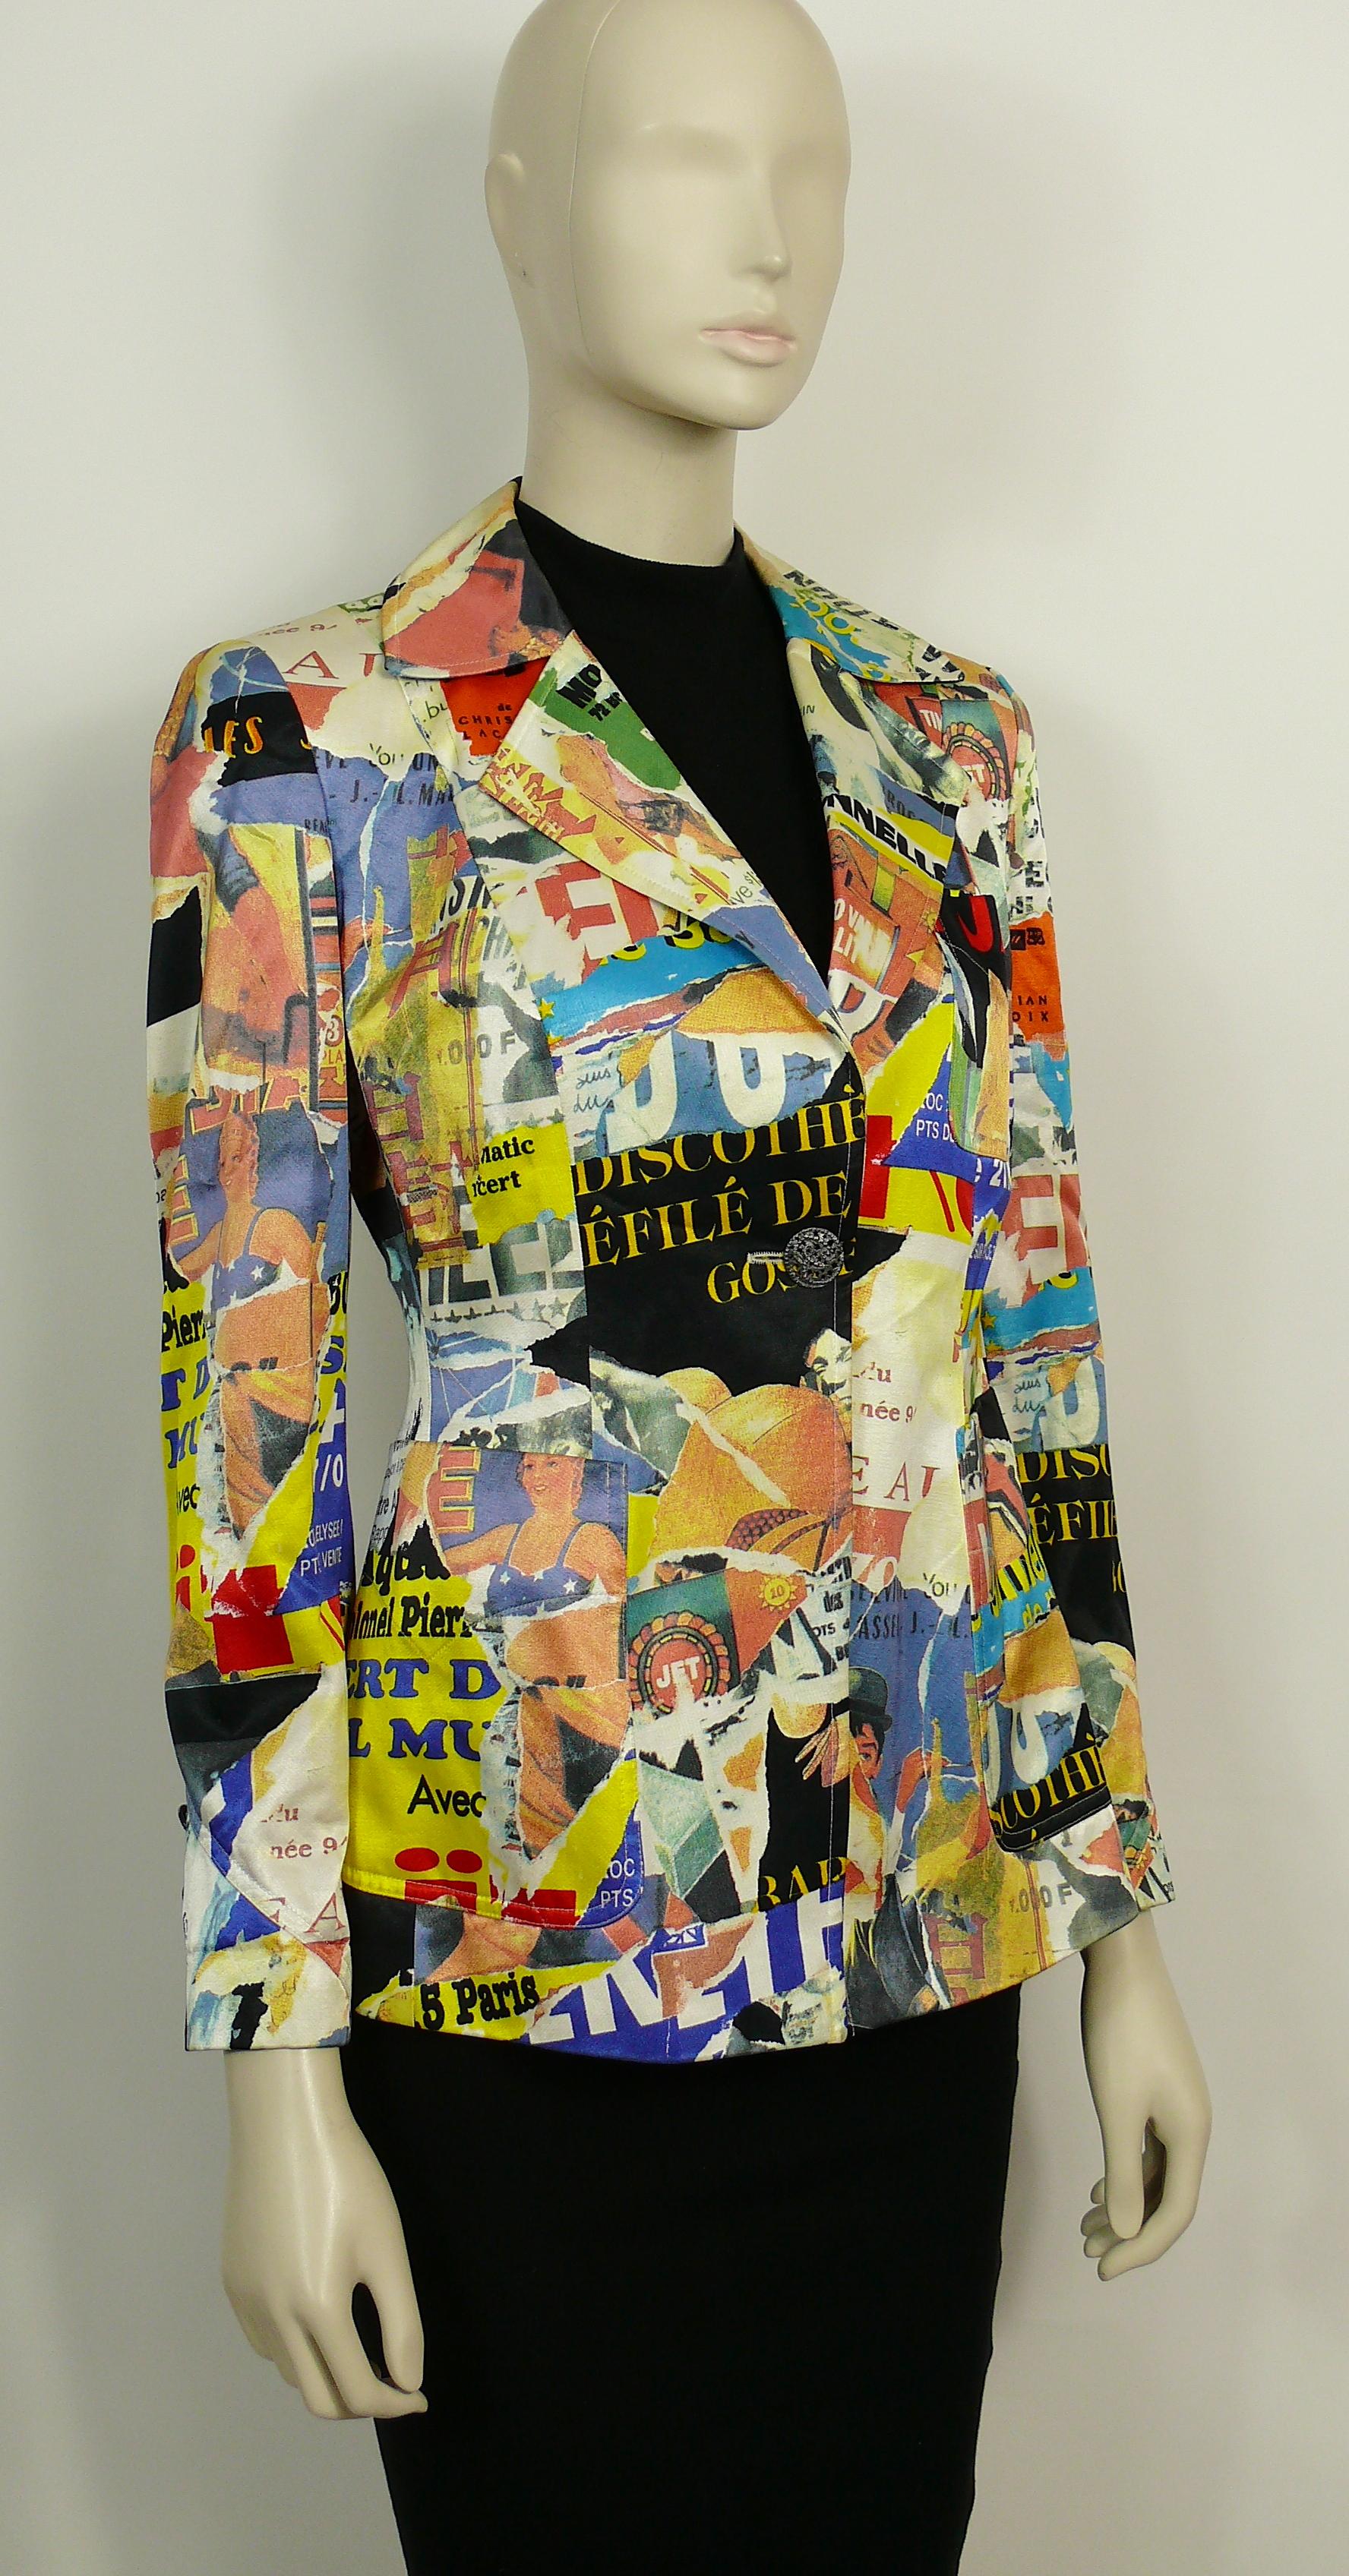 CHRISTIAN LACROIX vintage colourful Pop Art blazer featuring a stunning lacerated retro poster print all over in vibrant colors.

Label reads BAZAR de CHRISTIAN LACROIX.
Made in France.

Size label reads : 38.

Composition label reads : 61 % Cotton